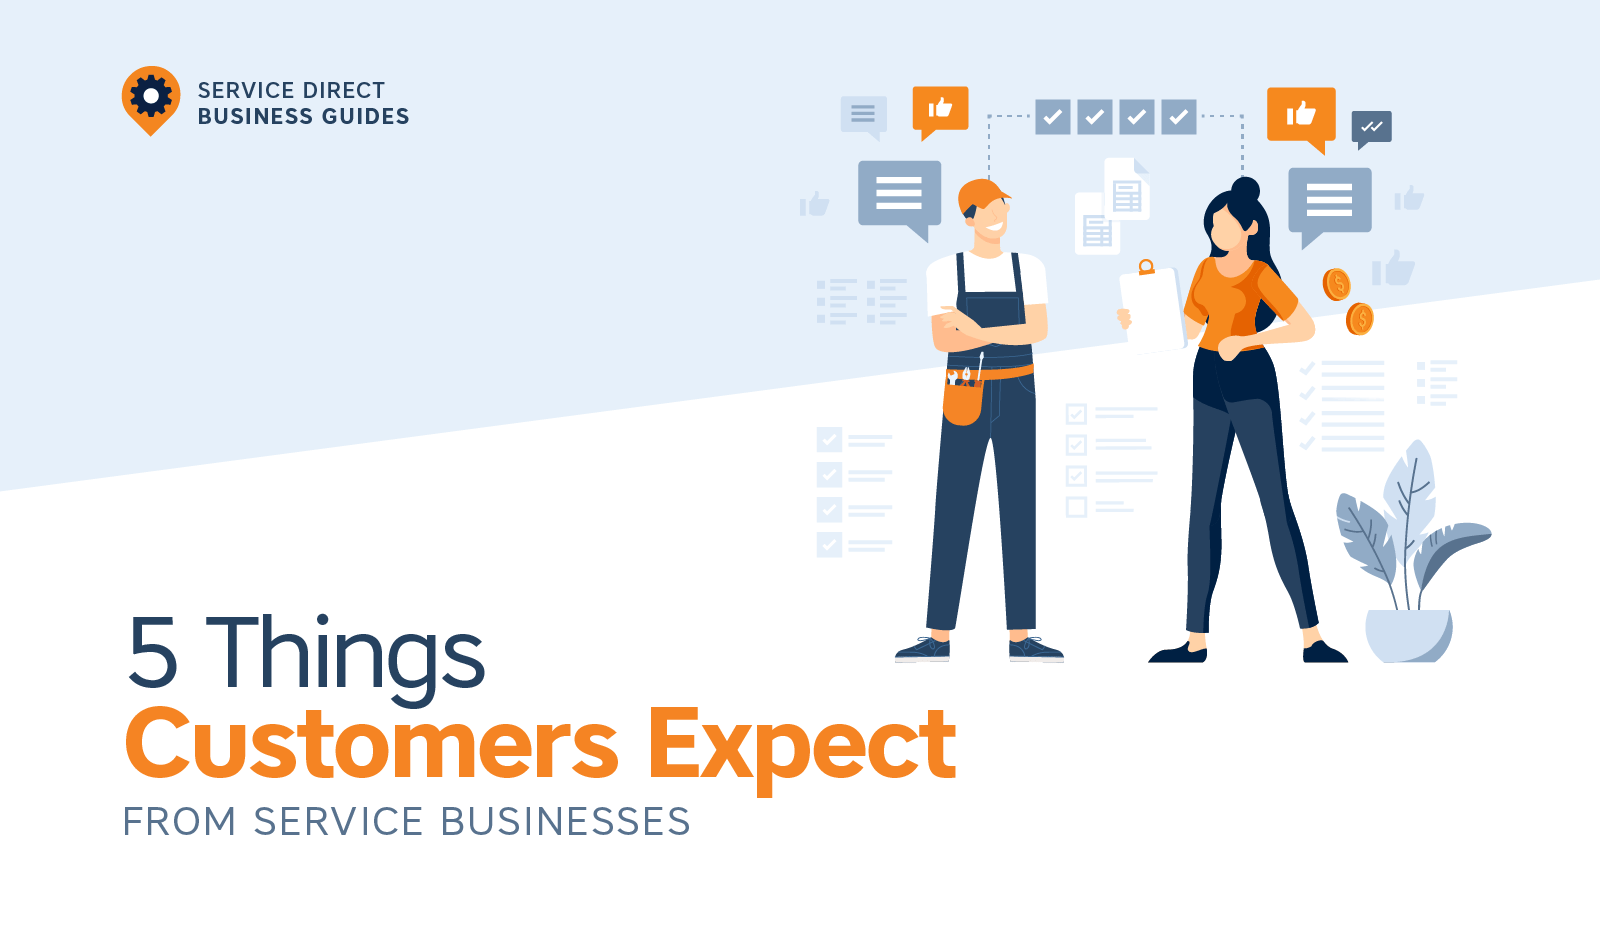 5 Things Customers Expect from Service Businesses Image